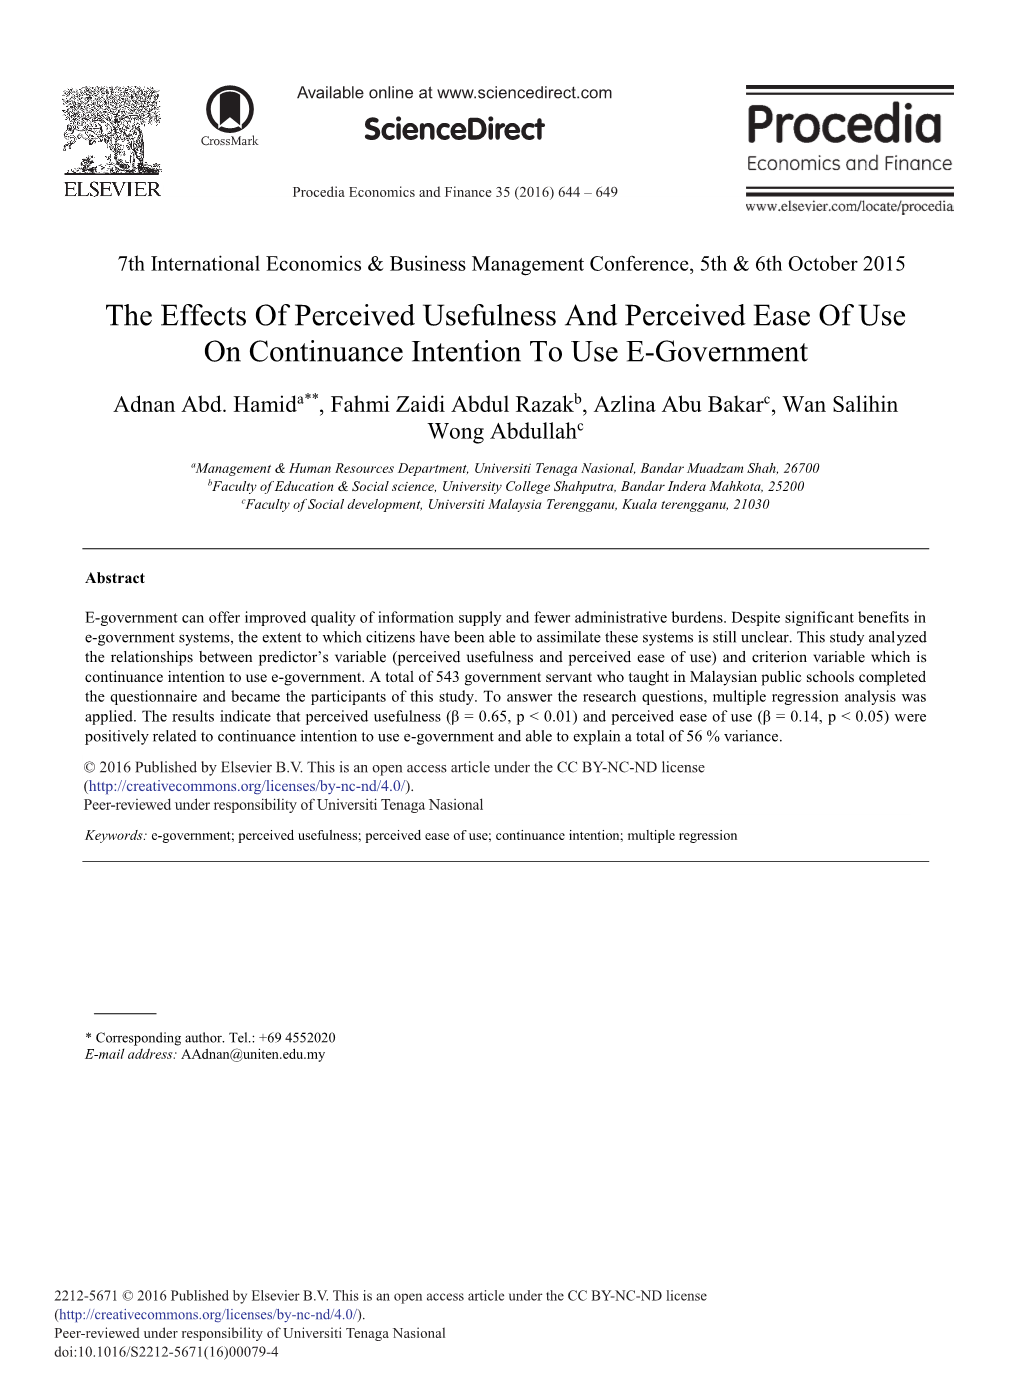 The Effects of Perceived Usefulness and Perceived Ease of Use on Continuance Intention to Use E-Government